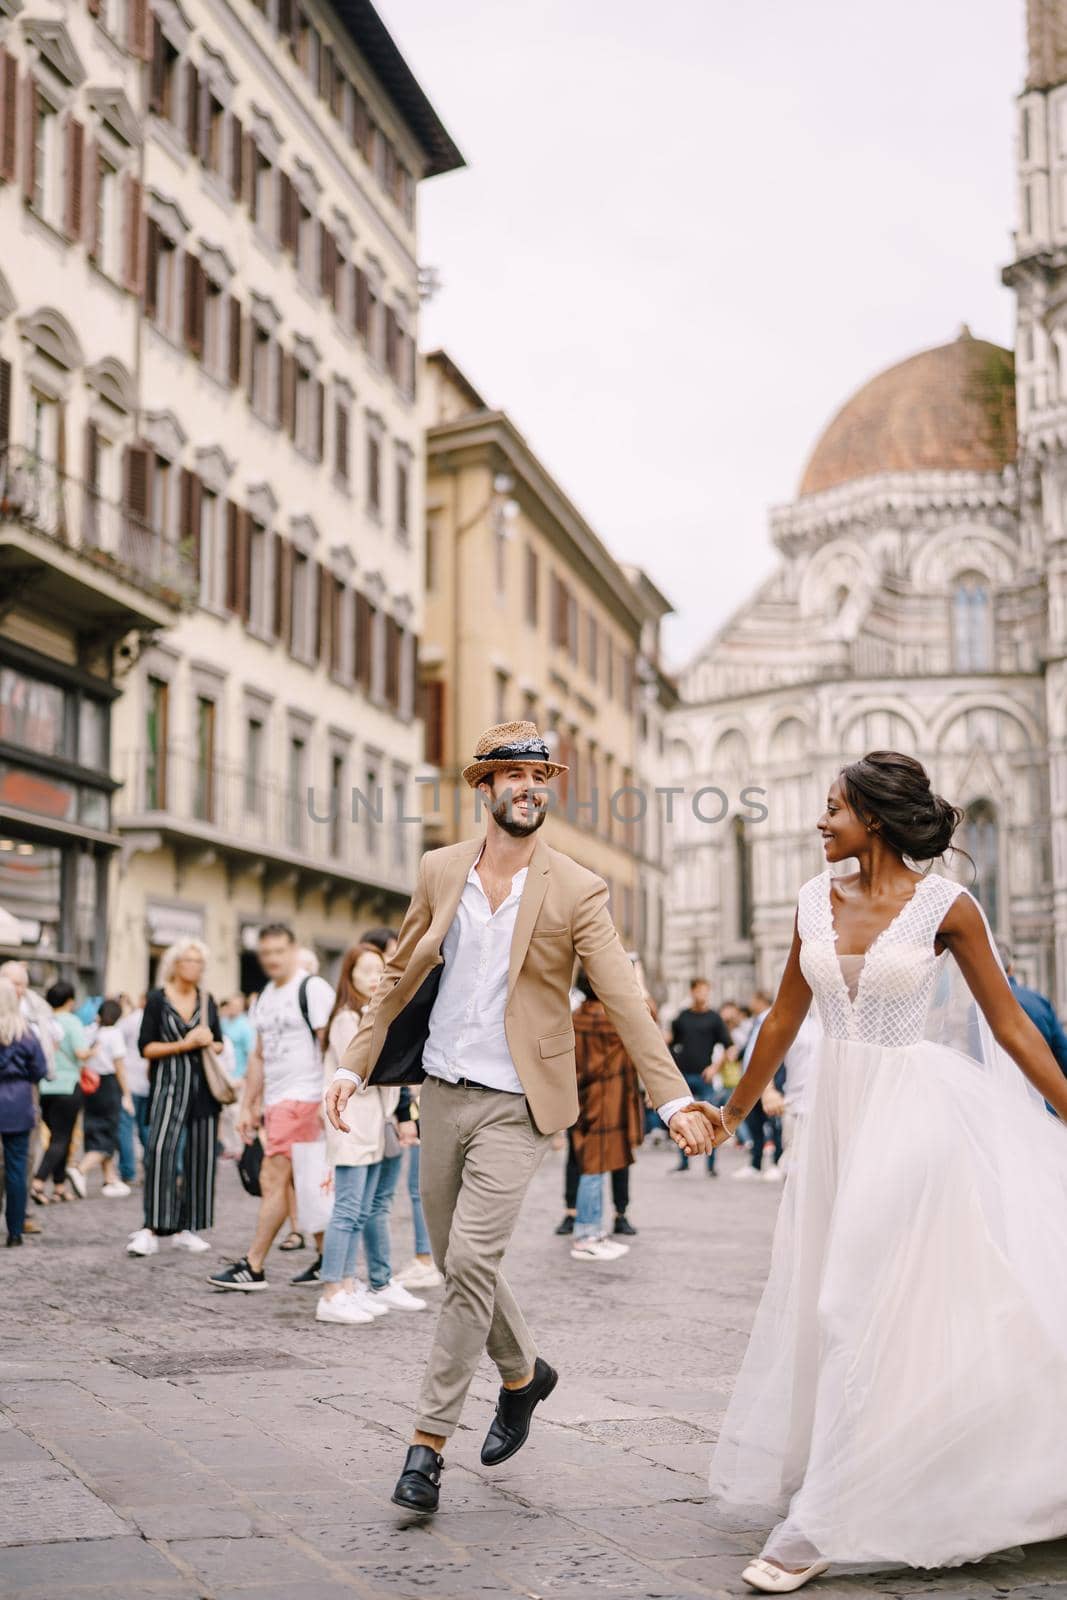 Interracial wedding couple. Wedding in Florence, Italy. African-American bride and Caucasian groom run along Piazza del Duomo. by Nadtochiy